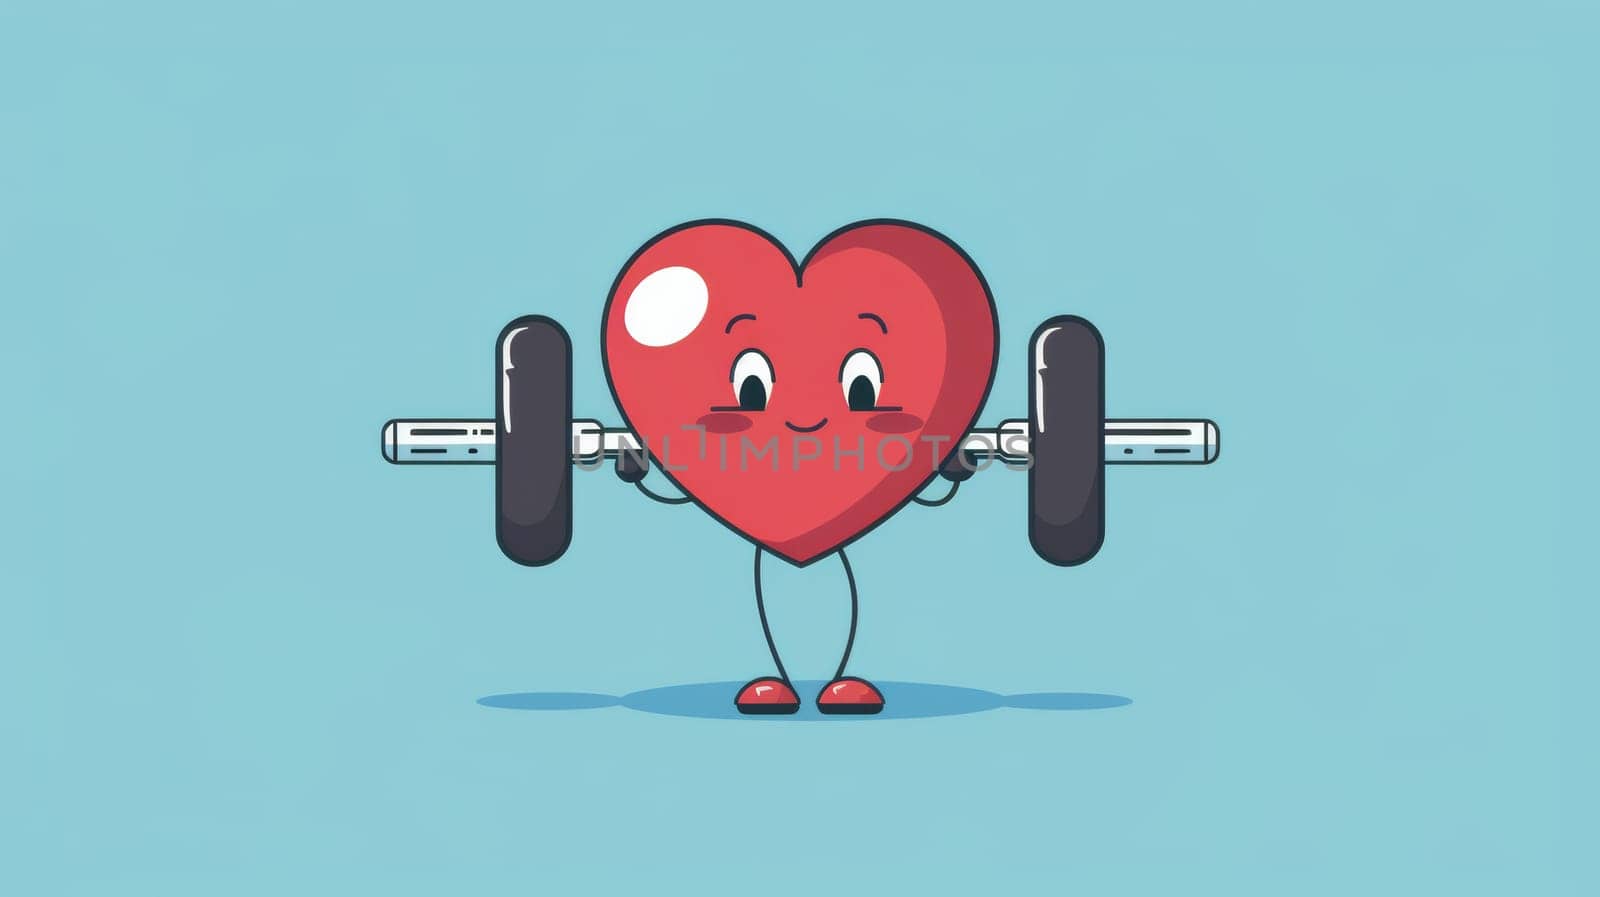 A heart character with arms and legs is shown in the image, actively holding a barbell. The heart appears to be engaged in weightlifting, showcasing strength and determination.